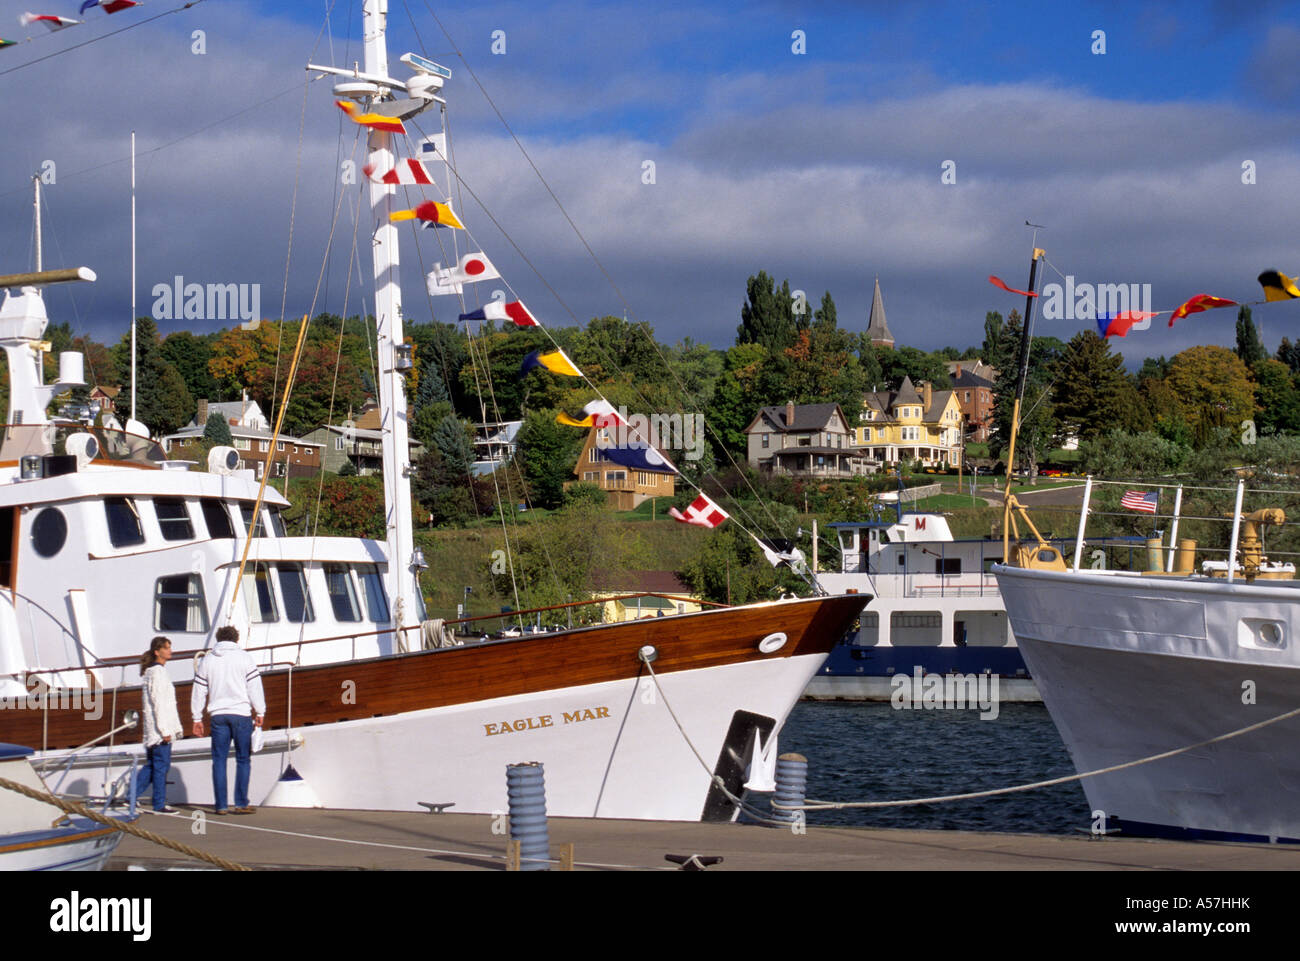 PICTURESQUE HARBOR OF BAYFIELD, WISCONSIN ON LAKE SUPERIOR, GATEWAY TO THE APOSTLE ISLANDS. FALL. Stock Photo